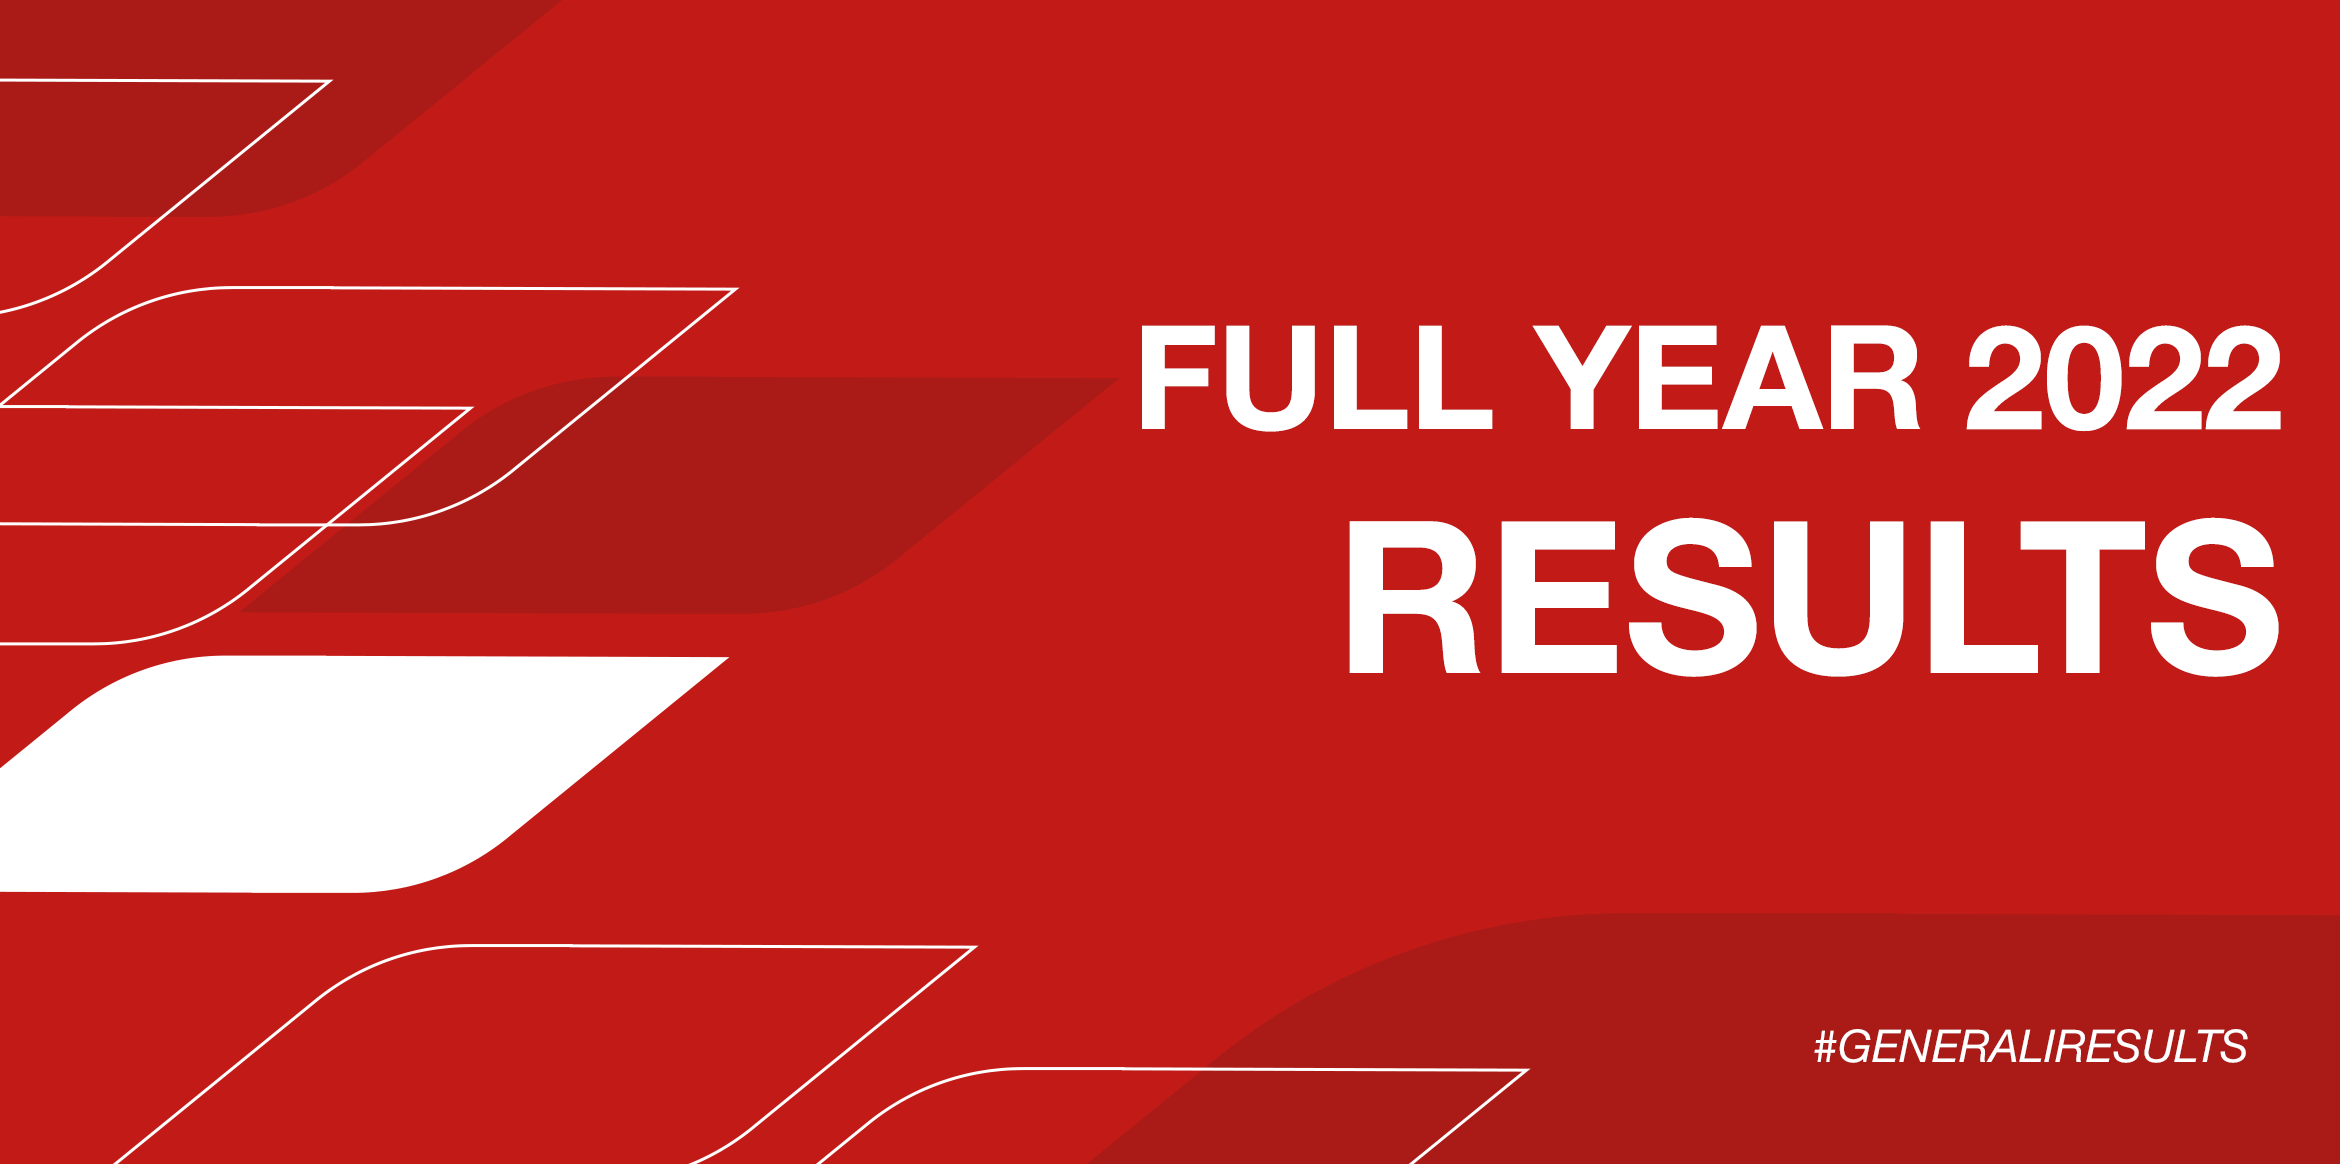 Generali_FULL YEAR 2022 Results_2340x1164.png